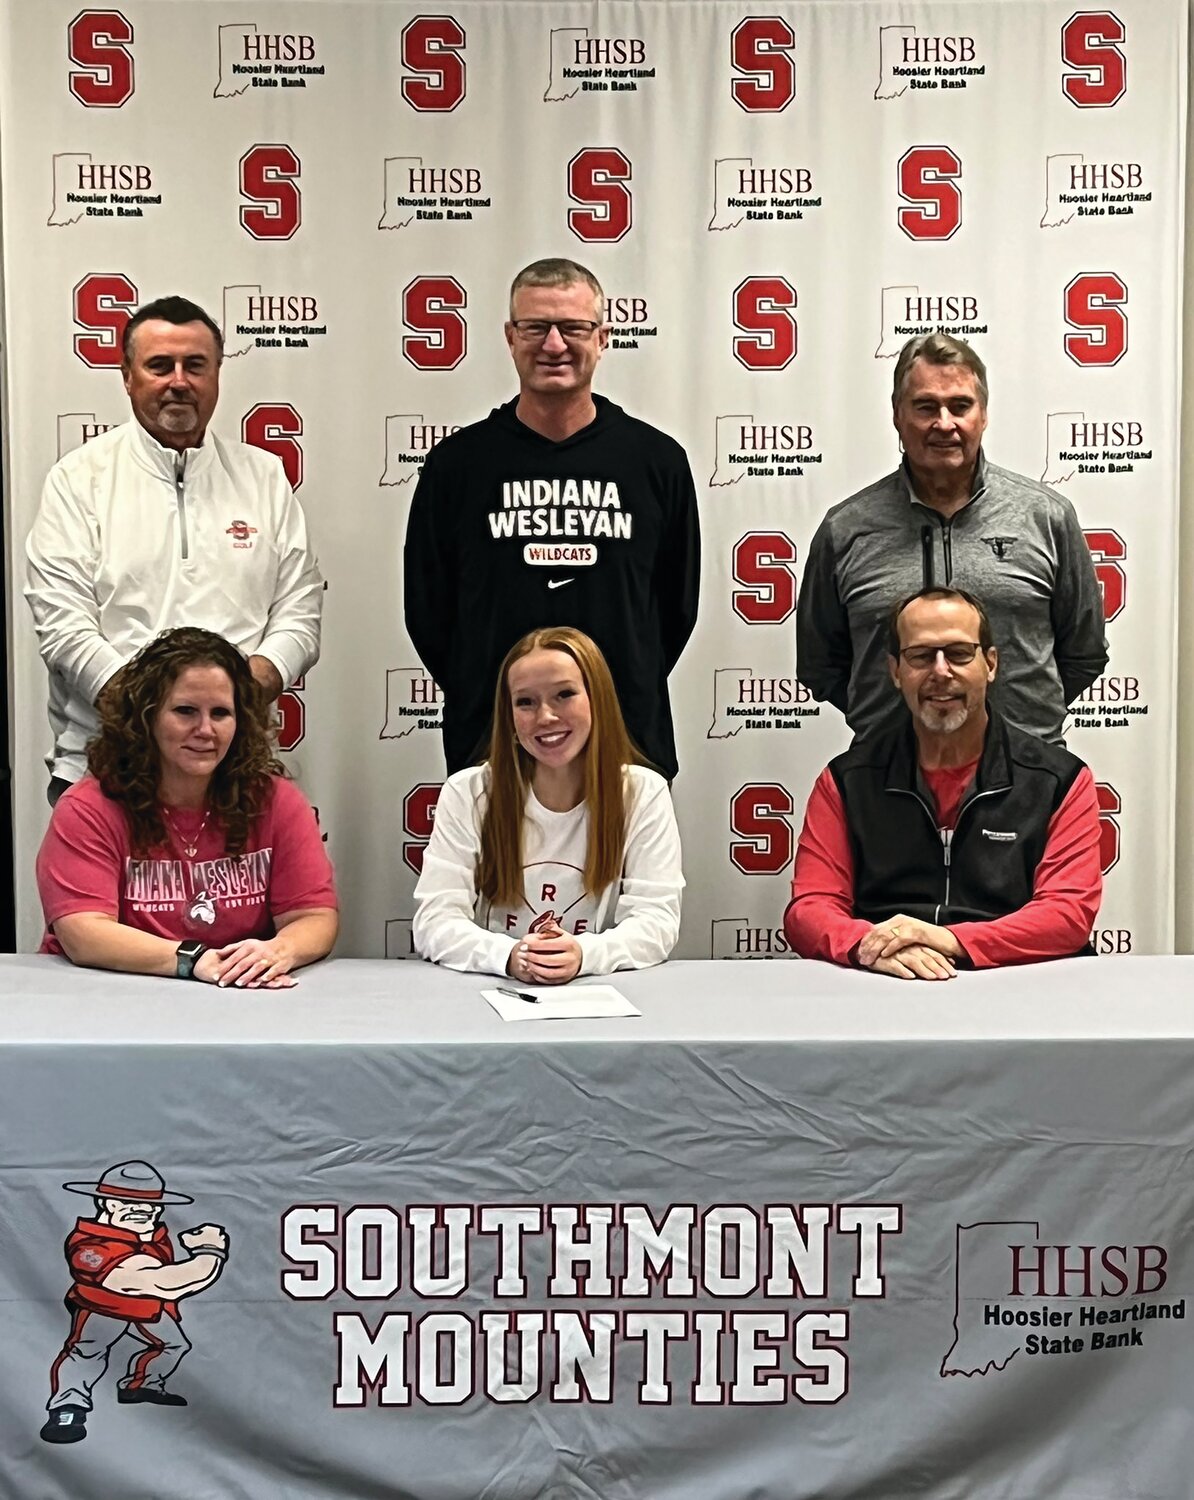 Southmont’s Addison Meadows made it official on Wednesday by signing with Indiana Wesleyan to continue her golf career. Pictured from L-R include: Mother Jennifer Meadows, Addison Meadows, and father Larry Meadows. Back Row L-R: Southmont coach Bill Whalen, Indiana Wesleyan Coach Kyle Bloom, Southmont assistant coach Dave Williamson.